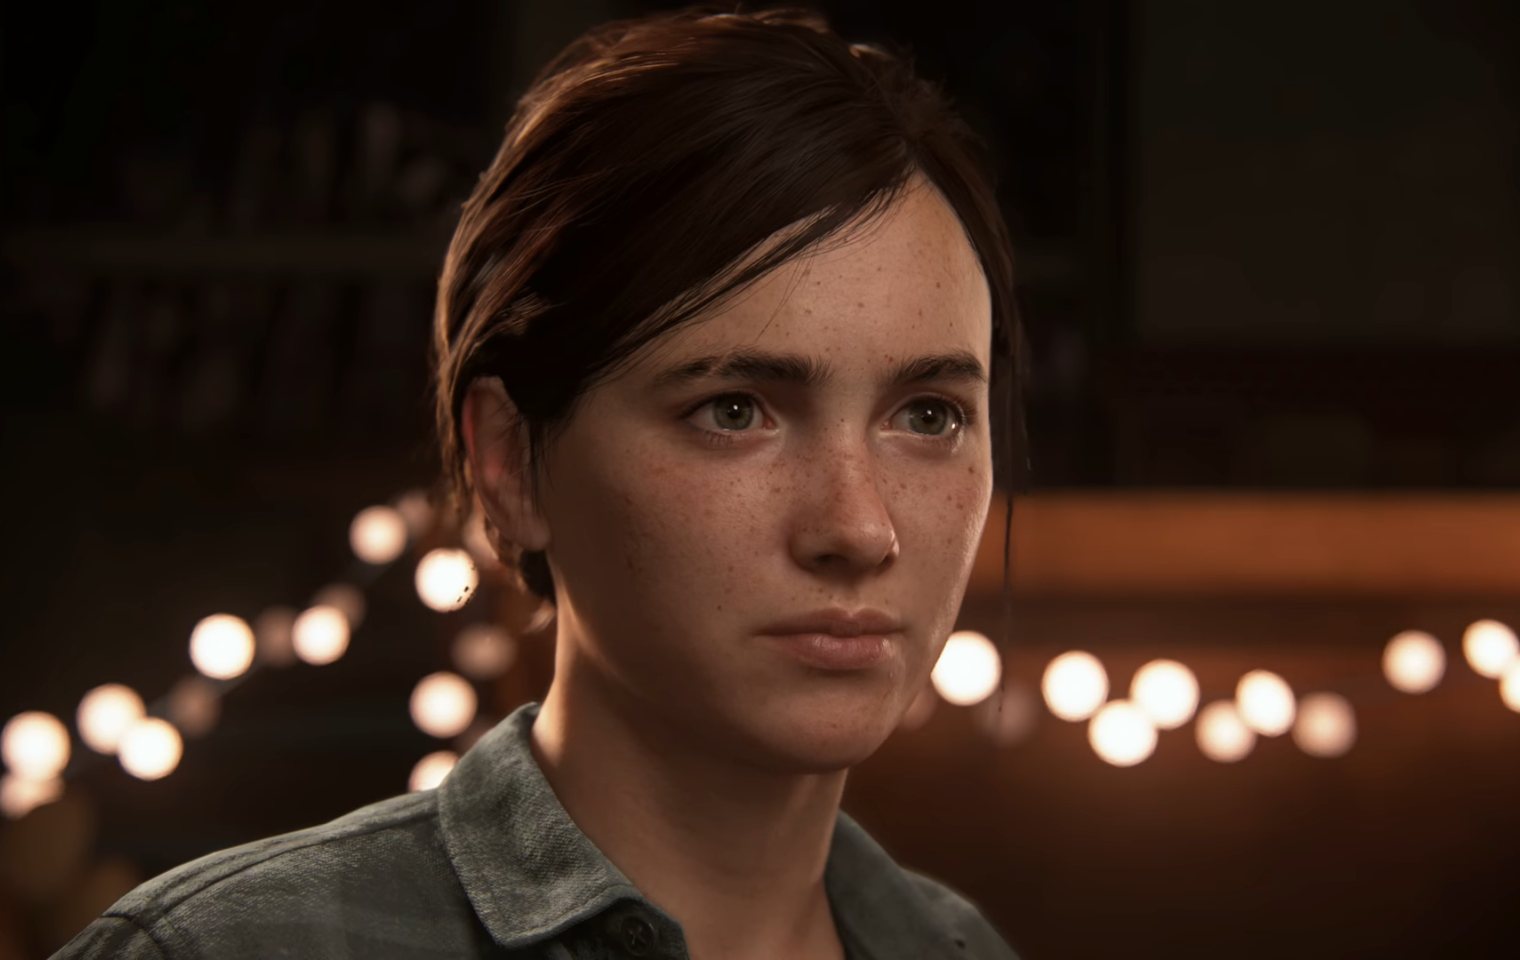 Opinion: The Last of Us Part II - Lessons on Letting Go